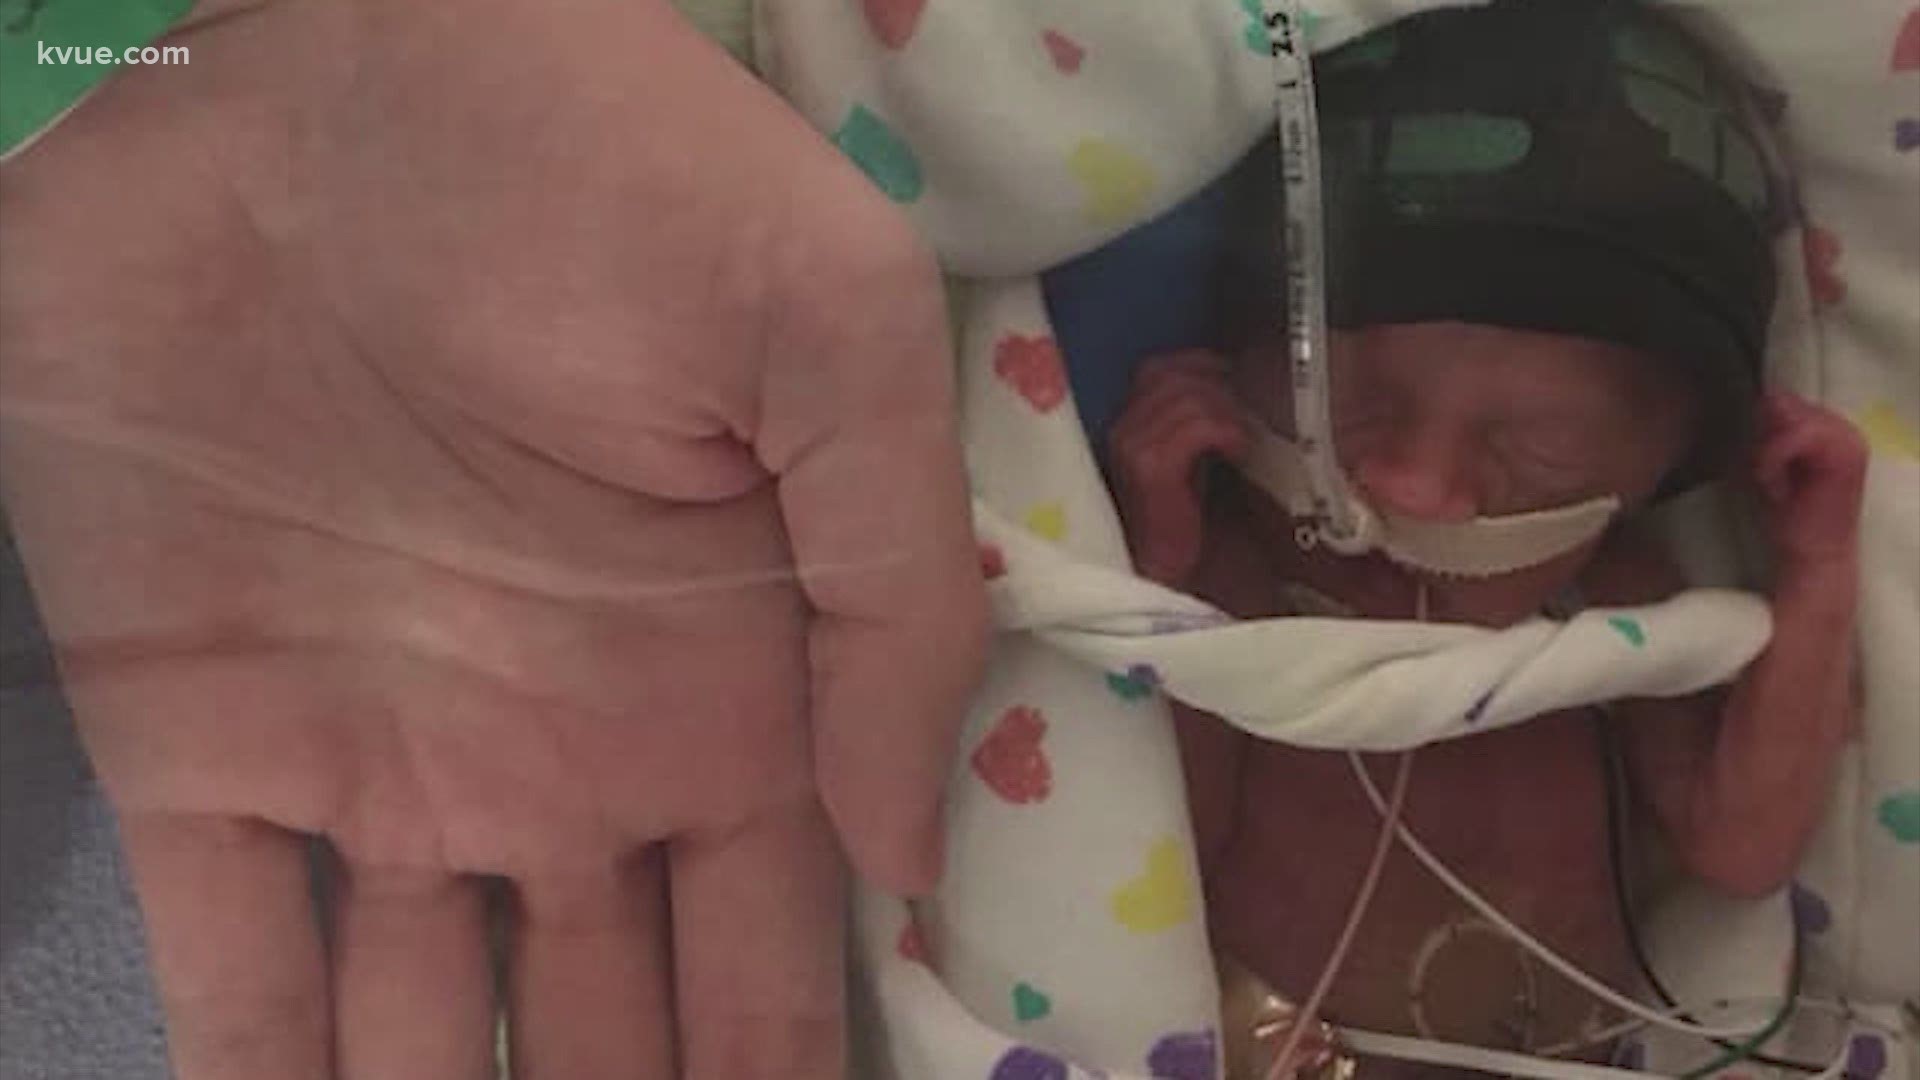 An Austin family is proof that even in the darkest times, miracles happen. Their baby came three months early, weighing less than two pounds.